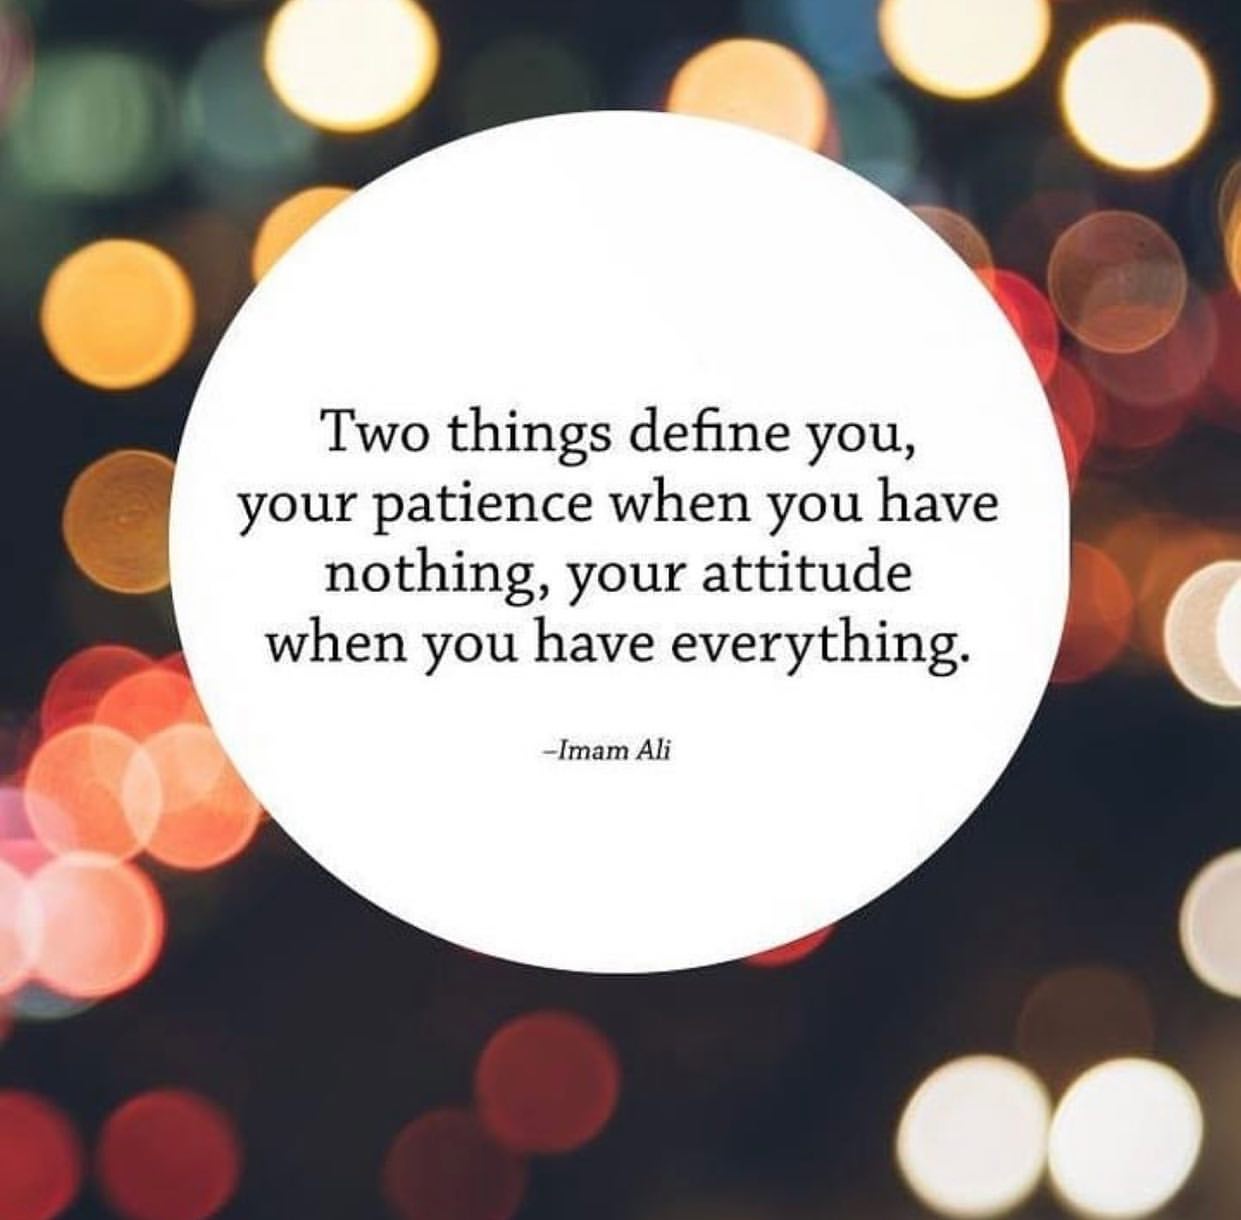 Two things define you, your patience when you have nothing, your attitude when you have everything.